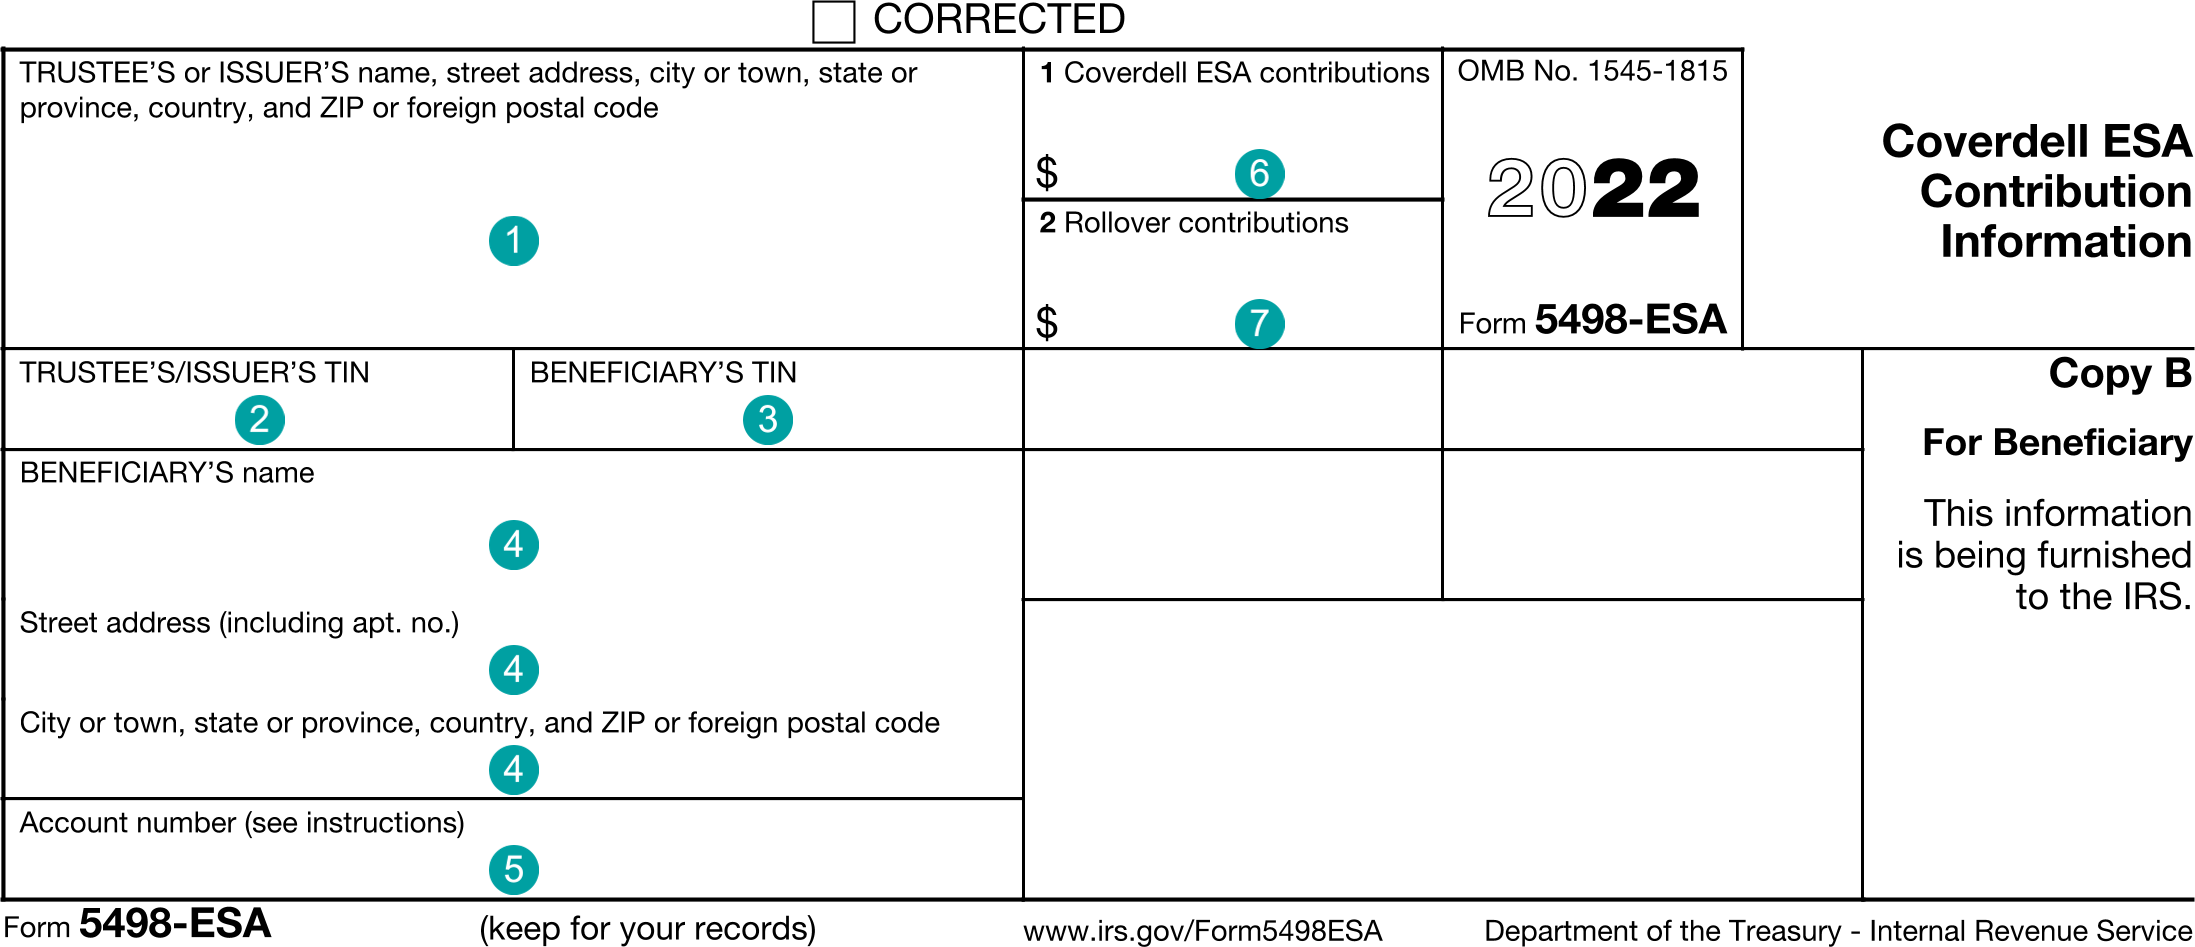 /img/forms/Tax5498Esa/2022/v5.0/Tax5498Esa.Recipient.Form.annotated.fdx.png